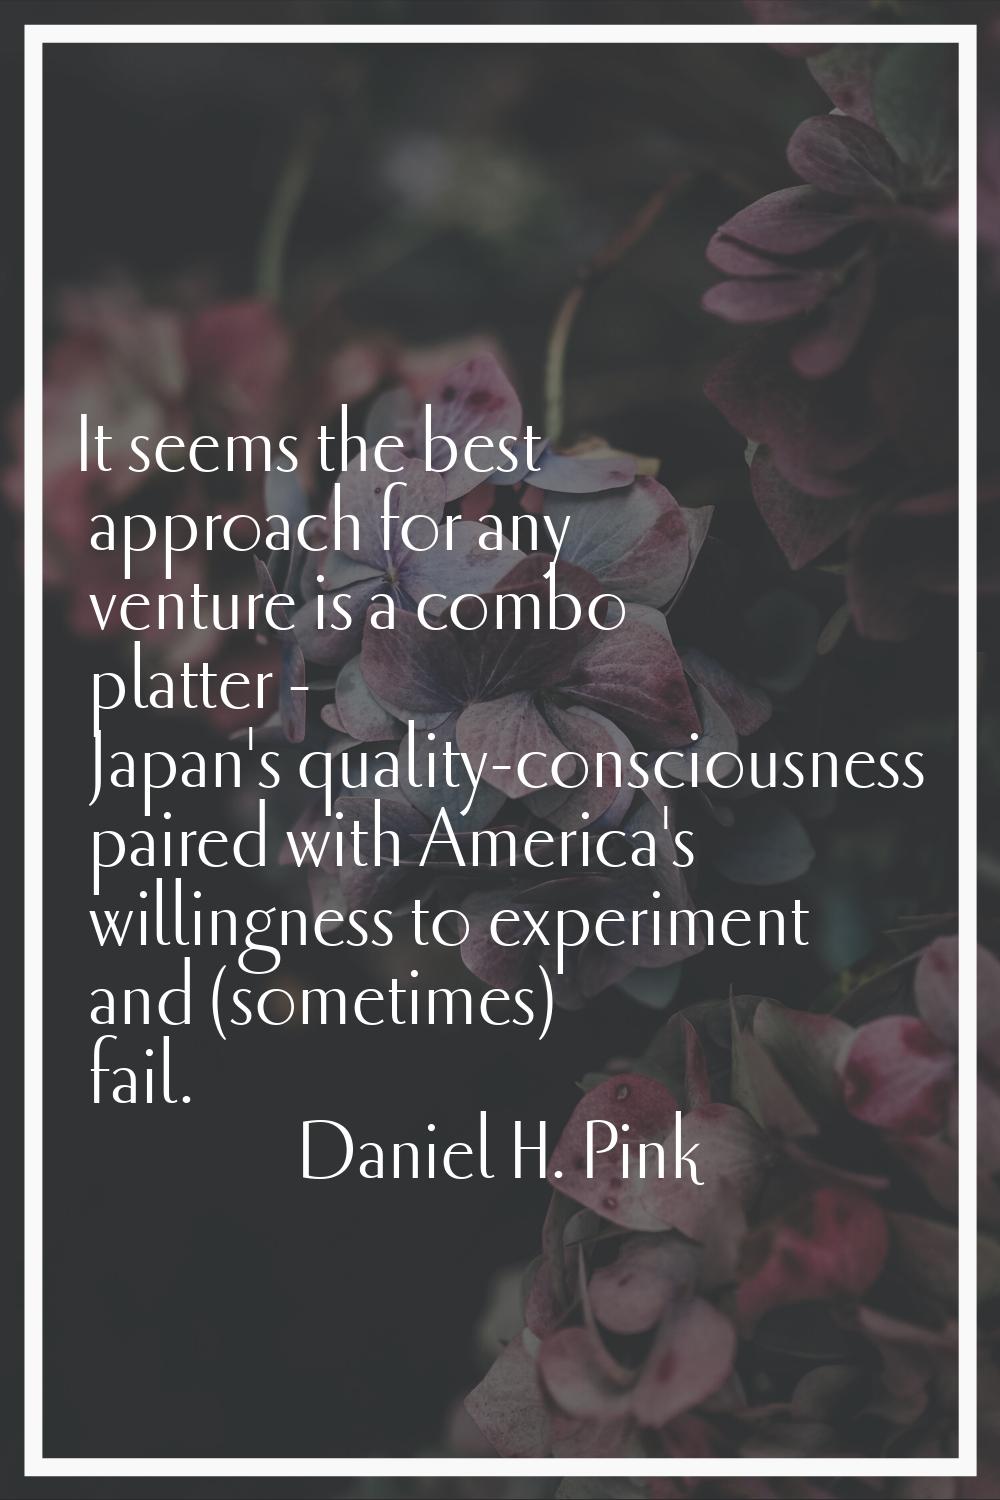 It seems the best approach for any venture is a combo platter - Japan's quality-consciousness paire